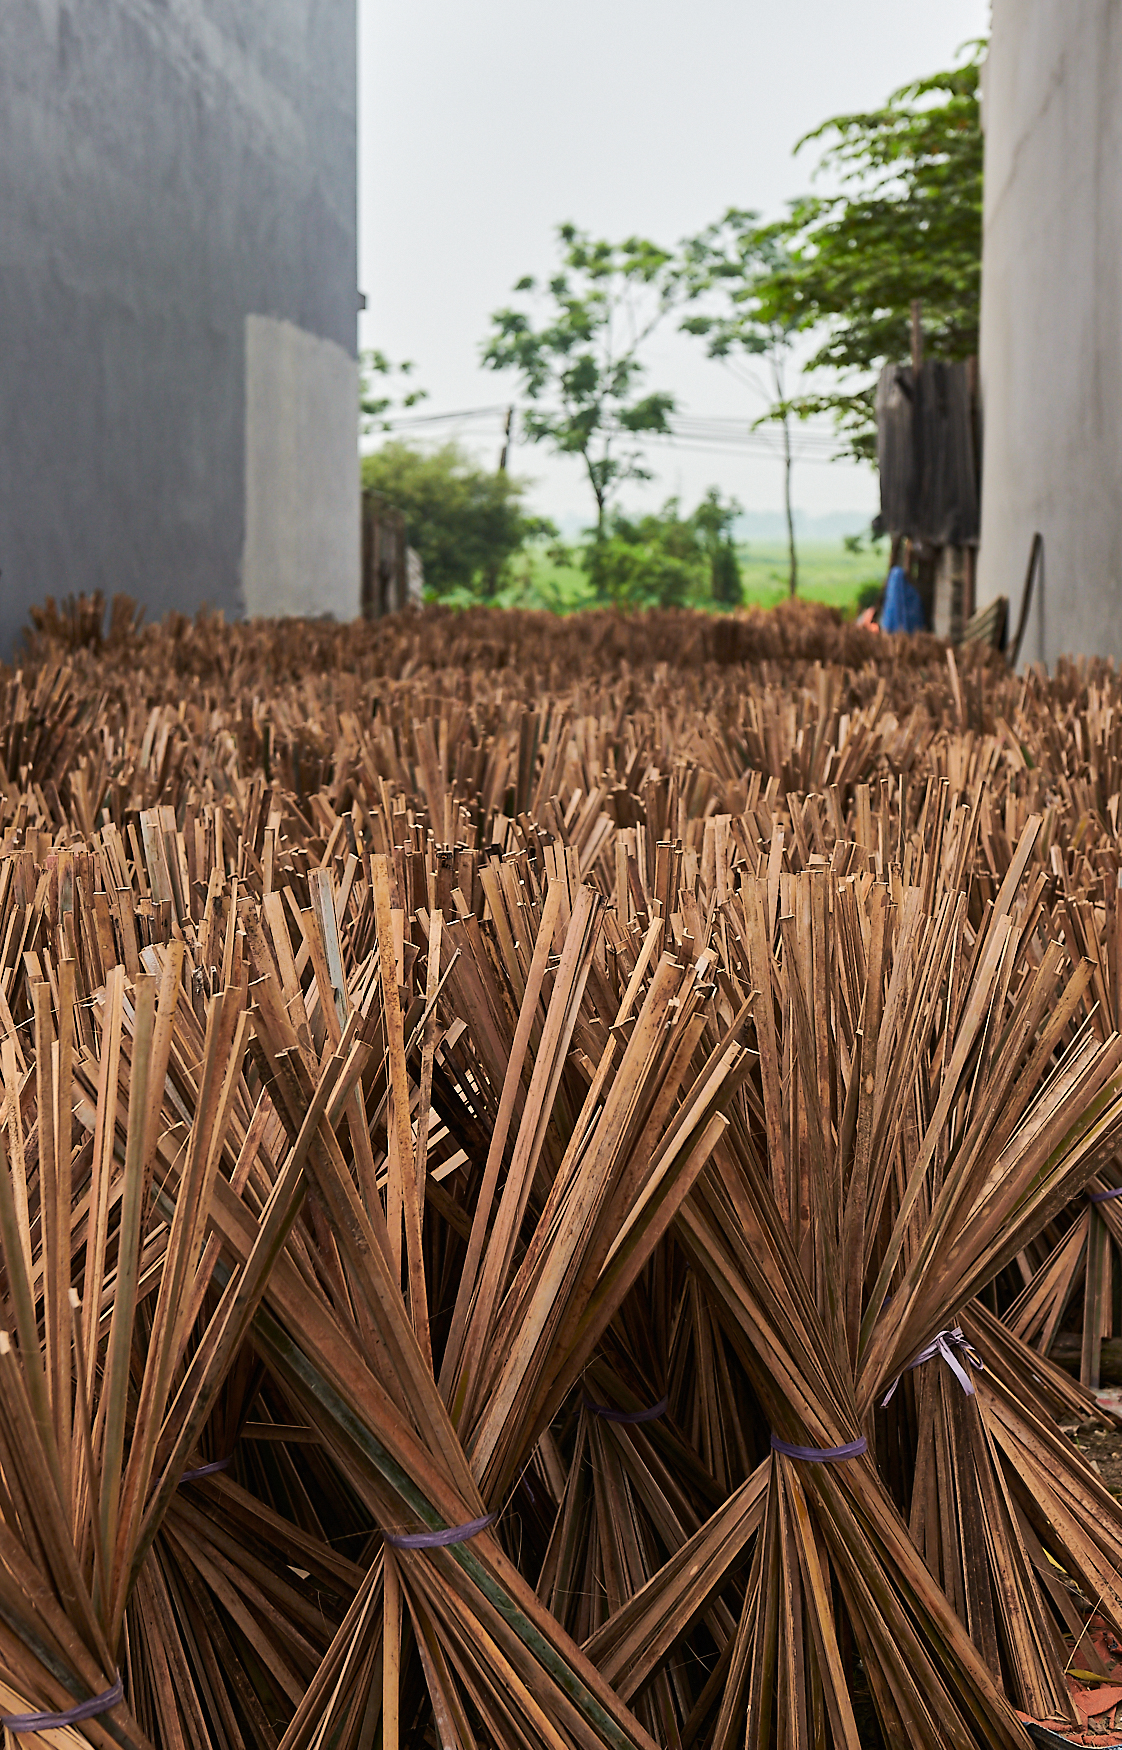 Stage 1 cut bamboo sticks drying in the sun prior to processing